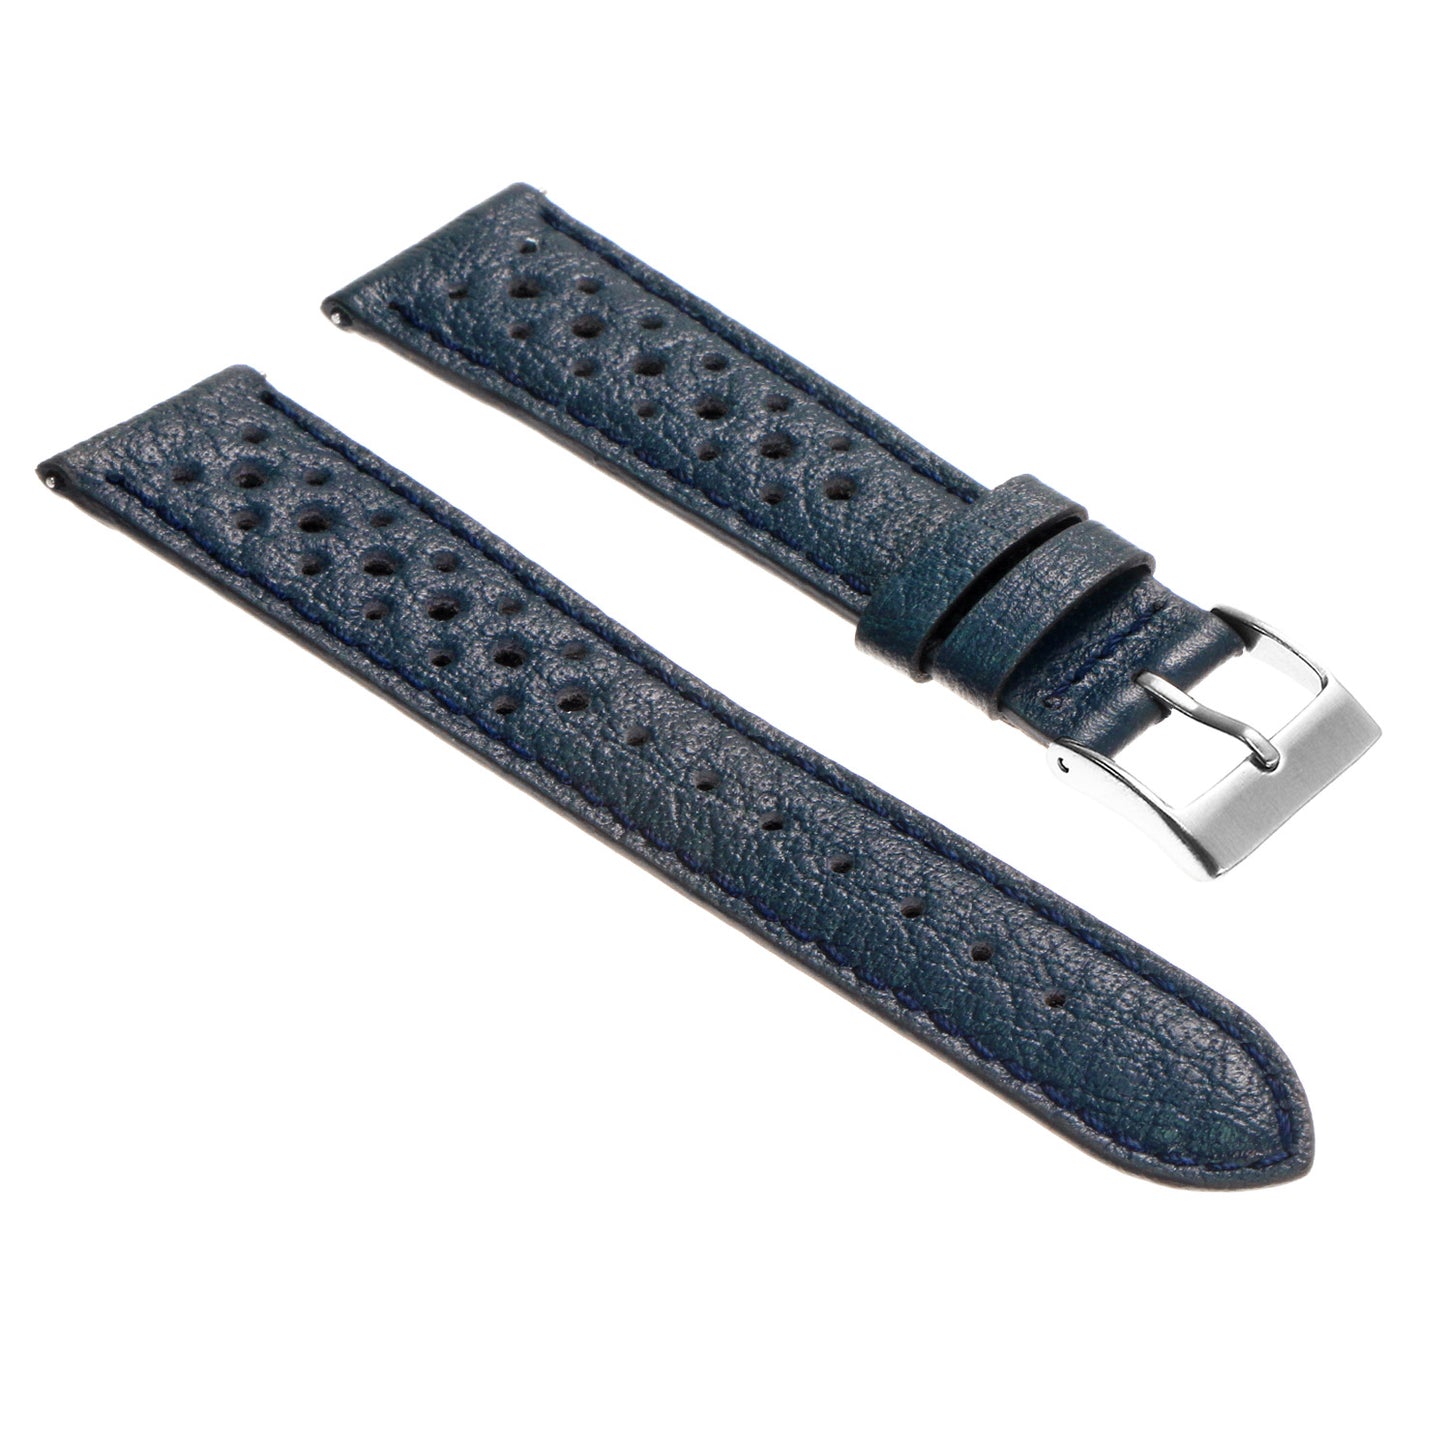 DASSARI Perforated Leather Rally Strap for Fitbit Versa 3